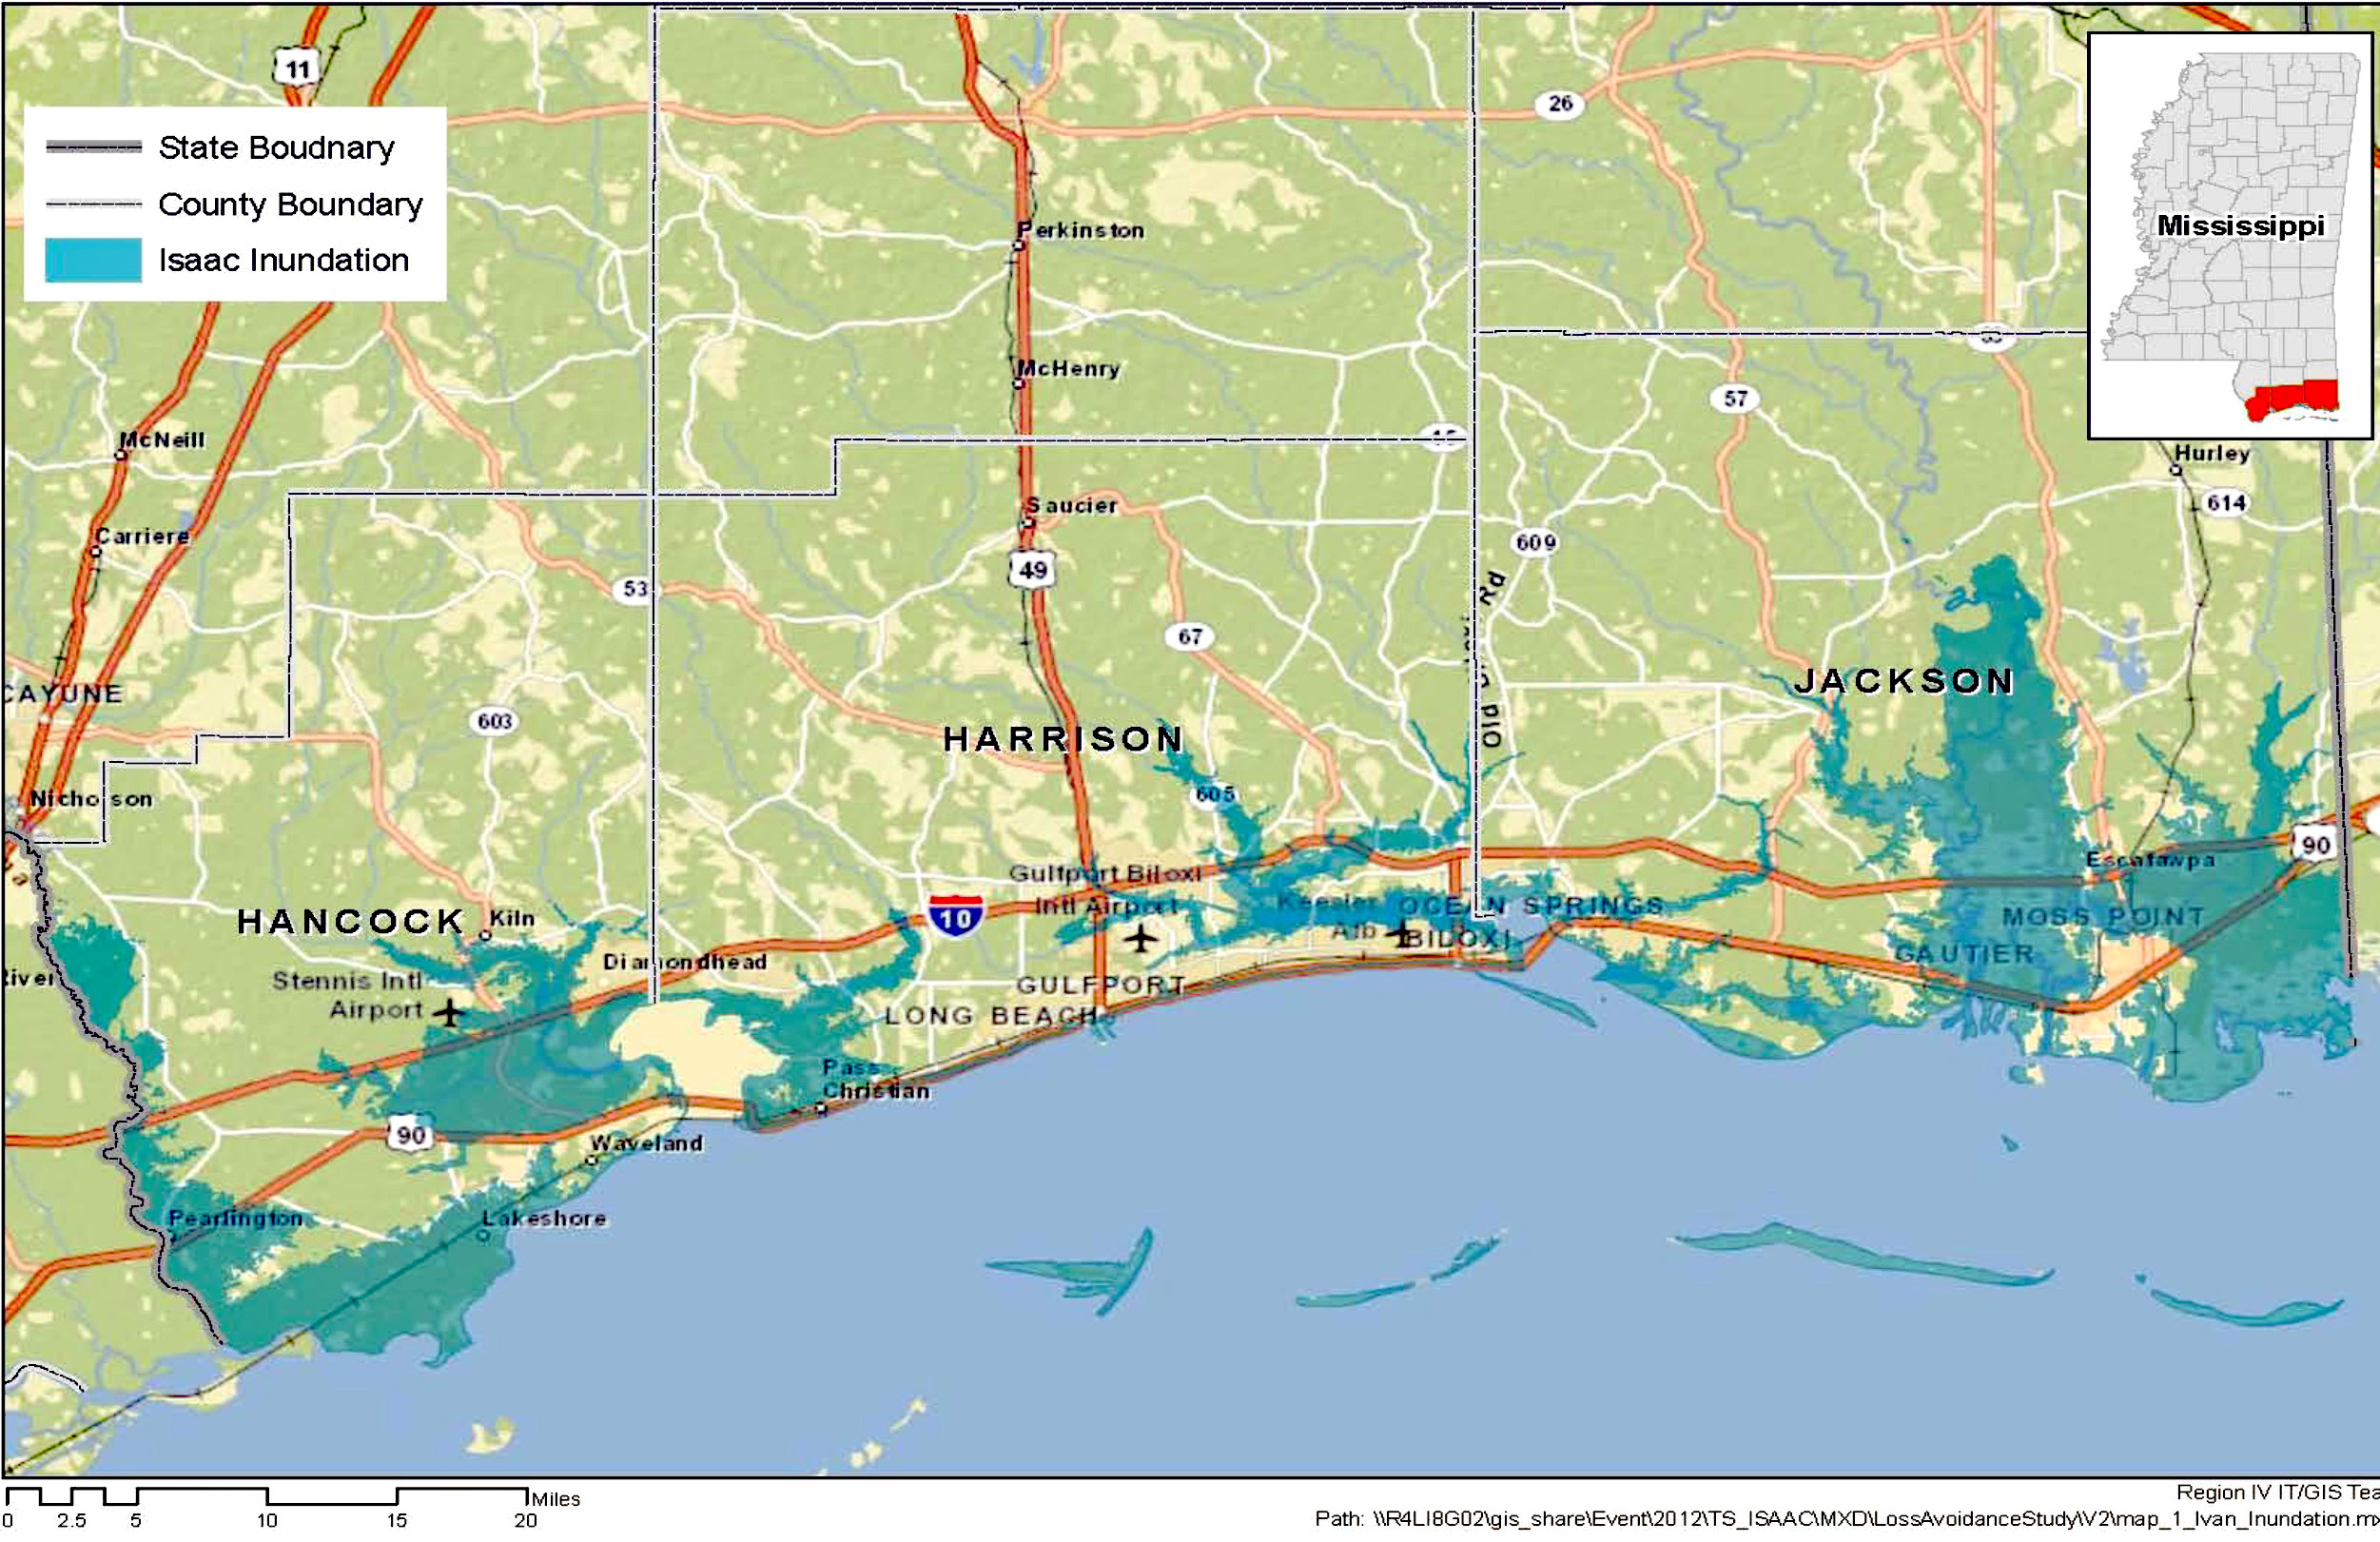 Mississippi project area: Isaac Inundation Area. Shown on map is Isaac inundation; state boundary; county boundary.